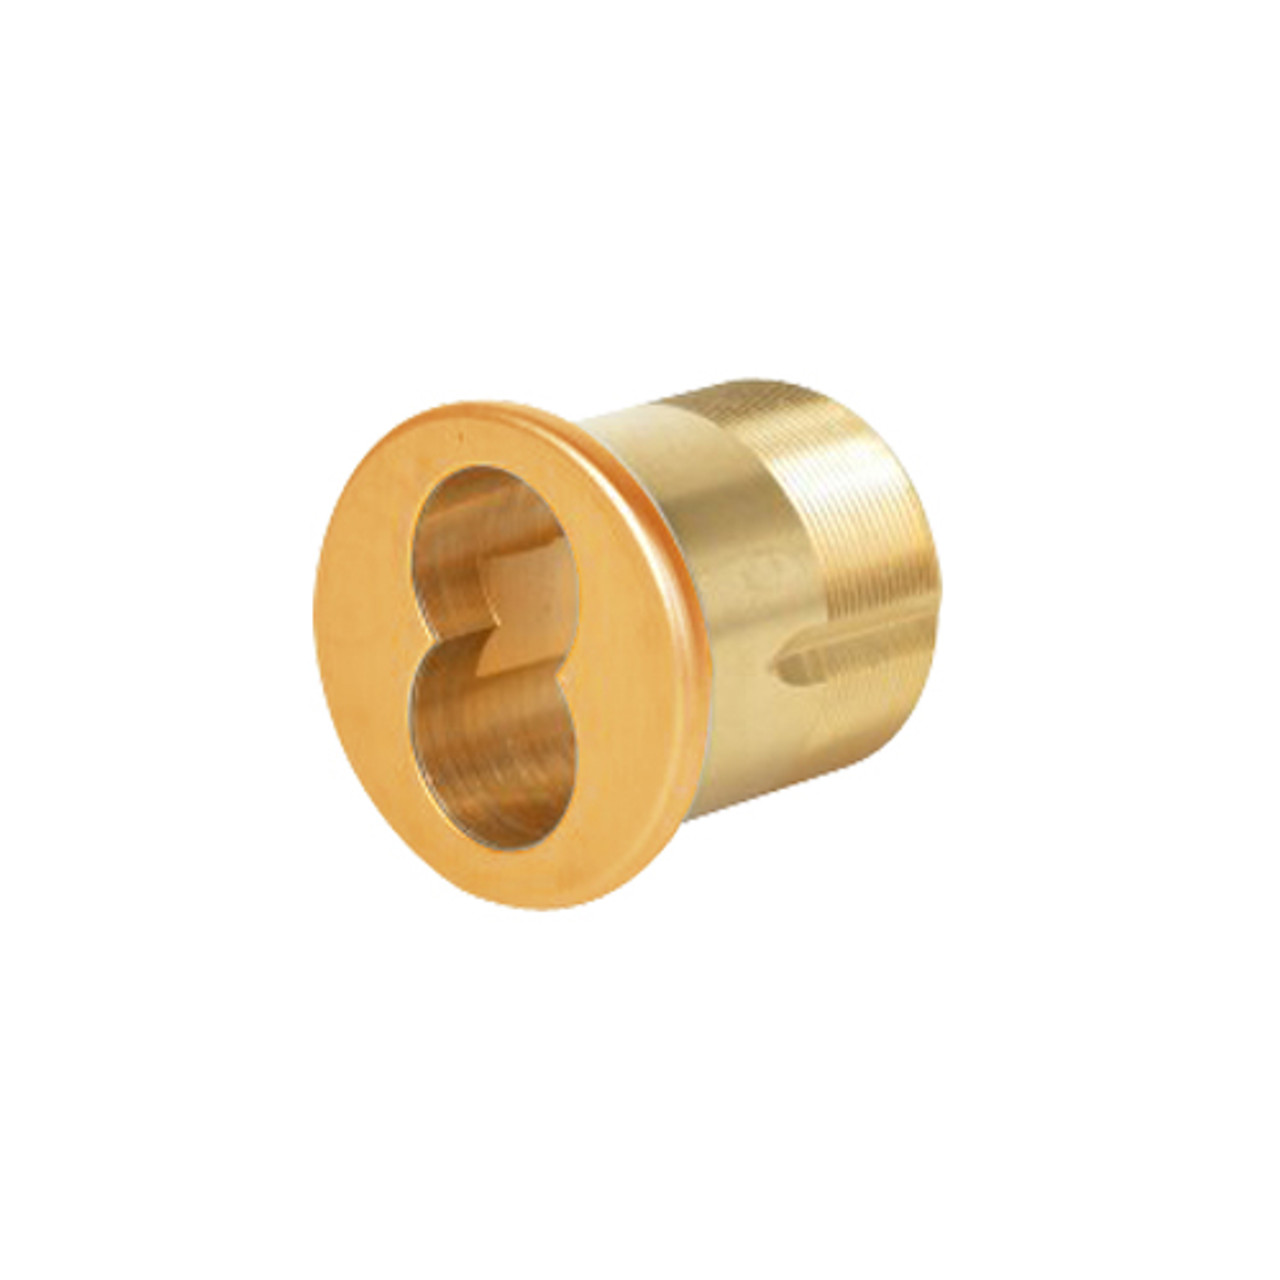 CR1070-114-A06-6-612 Corbin Mortise Interchangeable Core Housing with Schlage L9000 Cam in Satin Bronze Finish